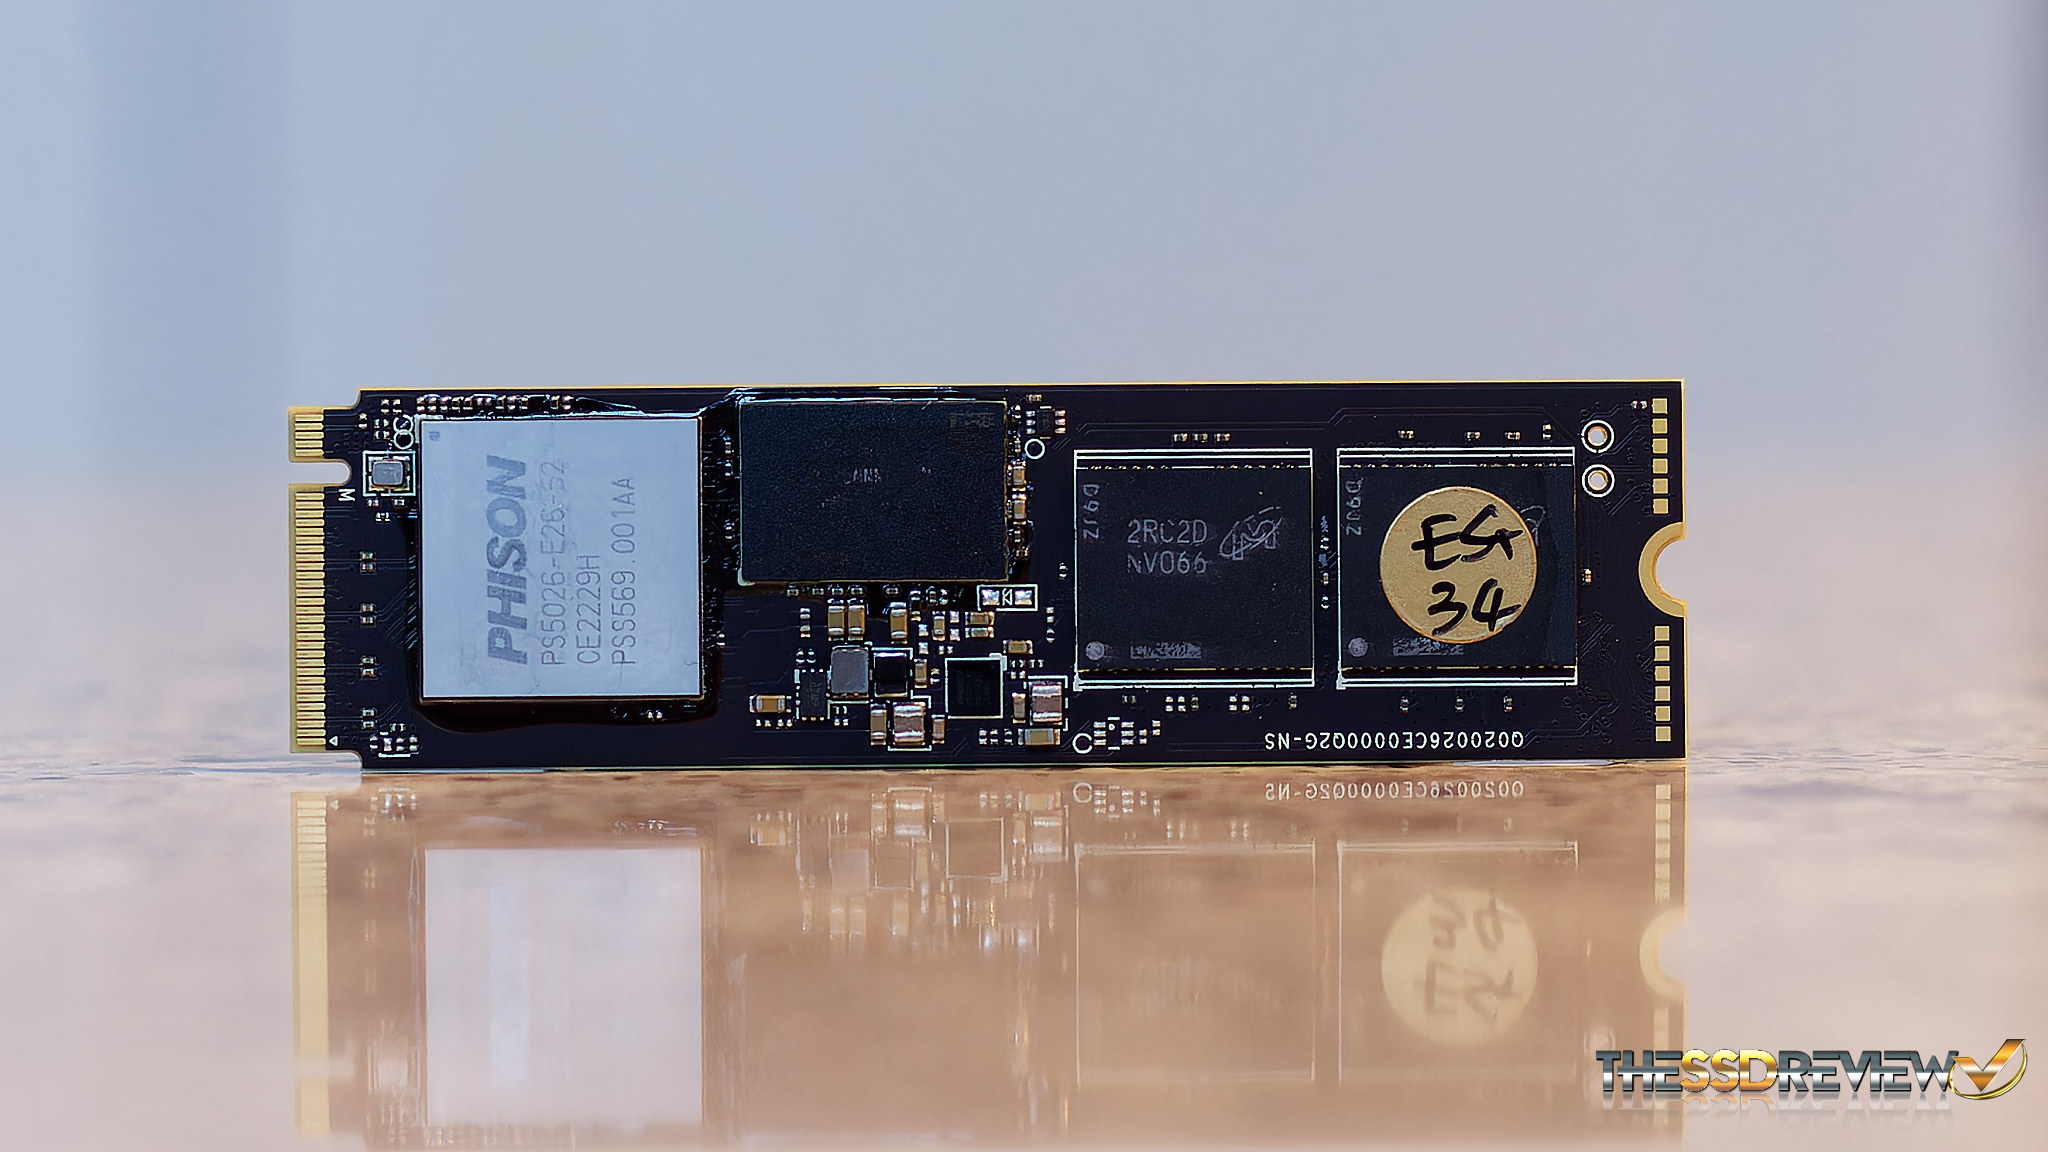 Phison PS5026-E26 Reference Design PCIe 5.0 2TB NVMe M.2 SSD Preview - Things Just Got a Faster | The SSD Review